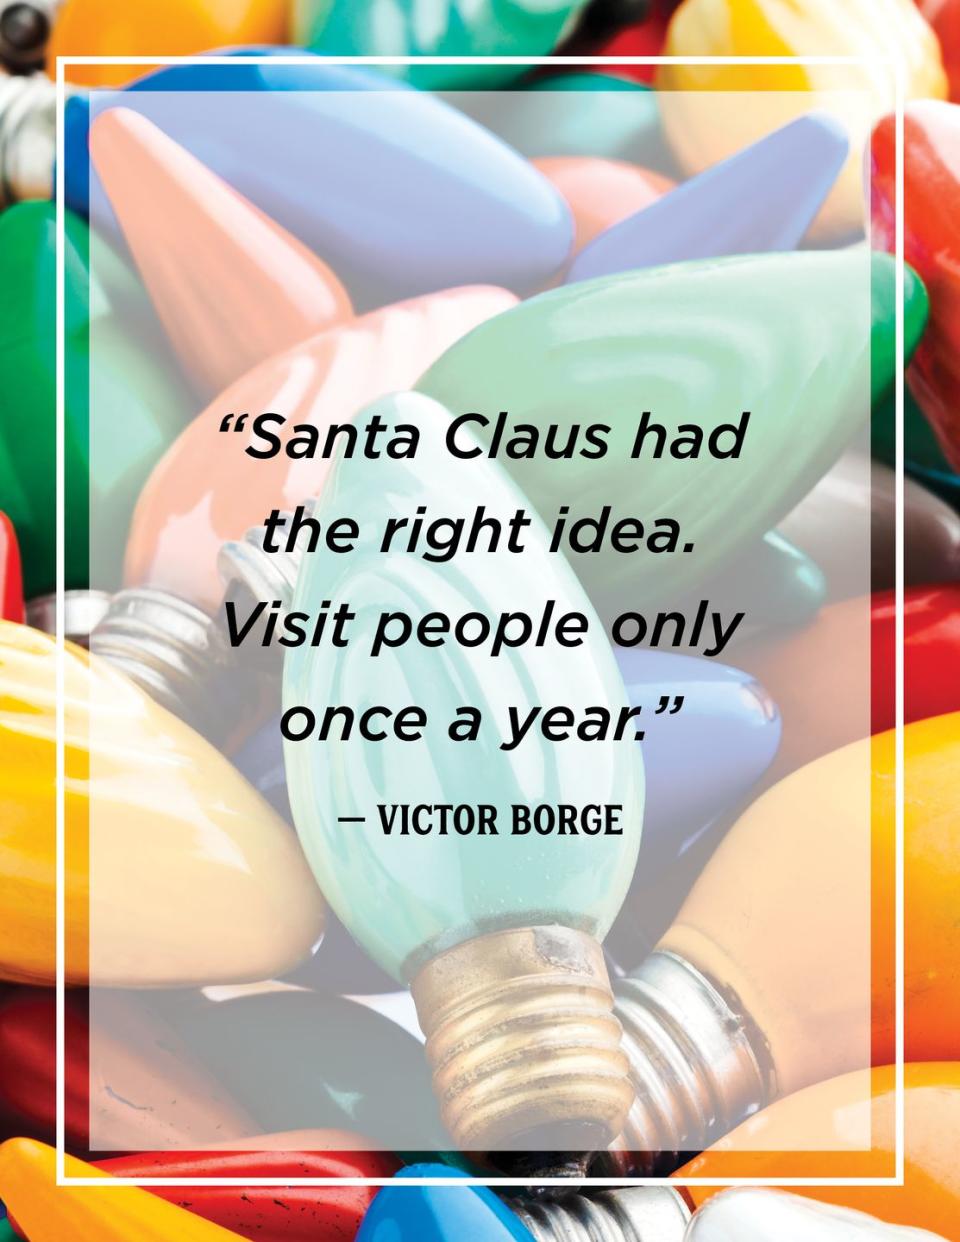 <p>"Santa Claus had the right idea. Visit people only once a year."</p>